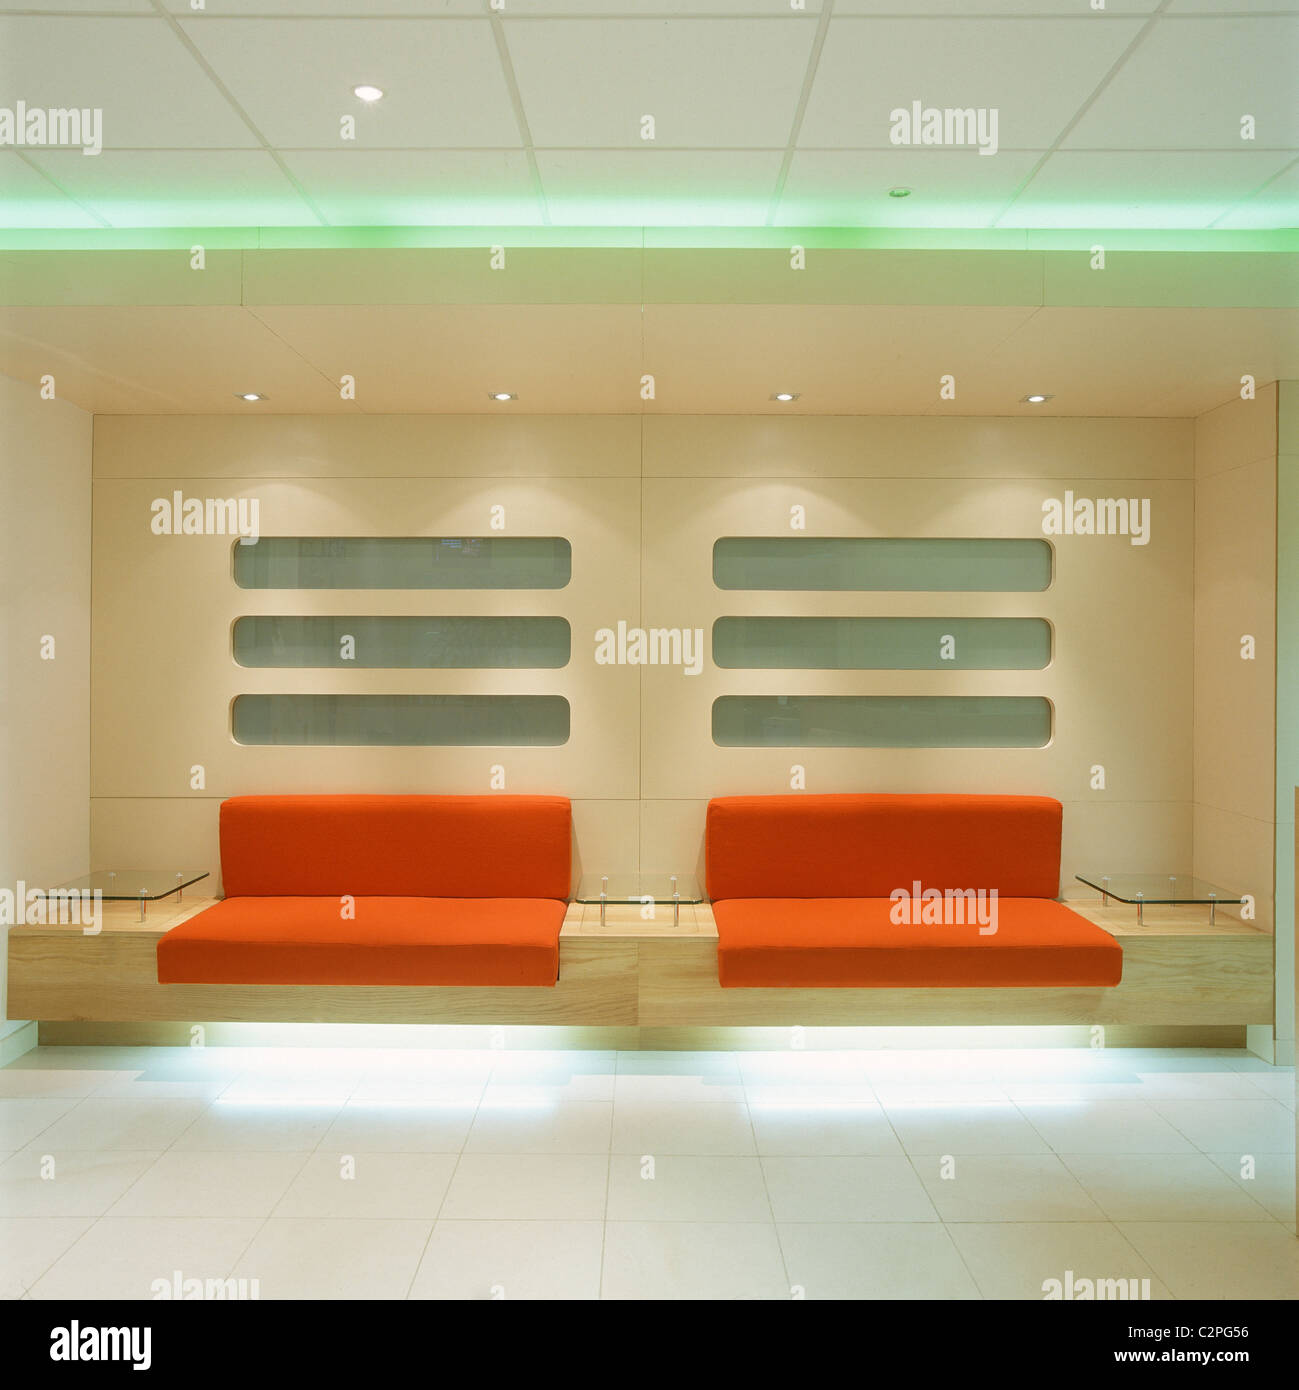 Design Agency, London. Reception area seating. Stock Photo